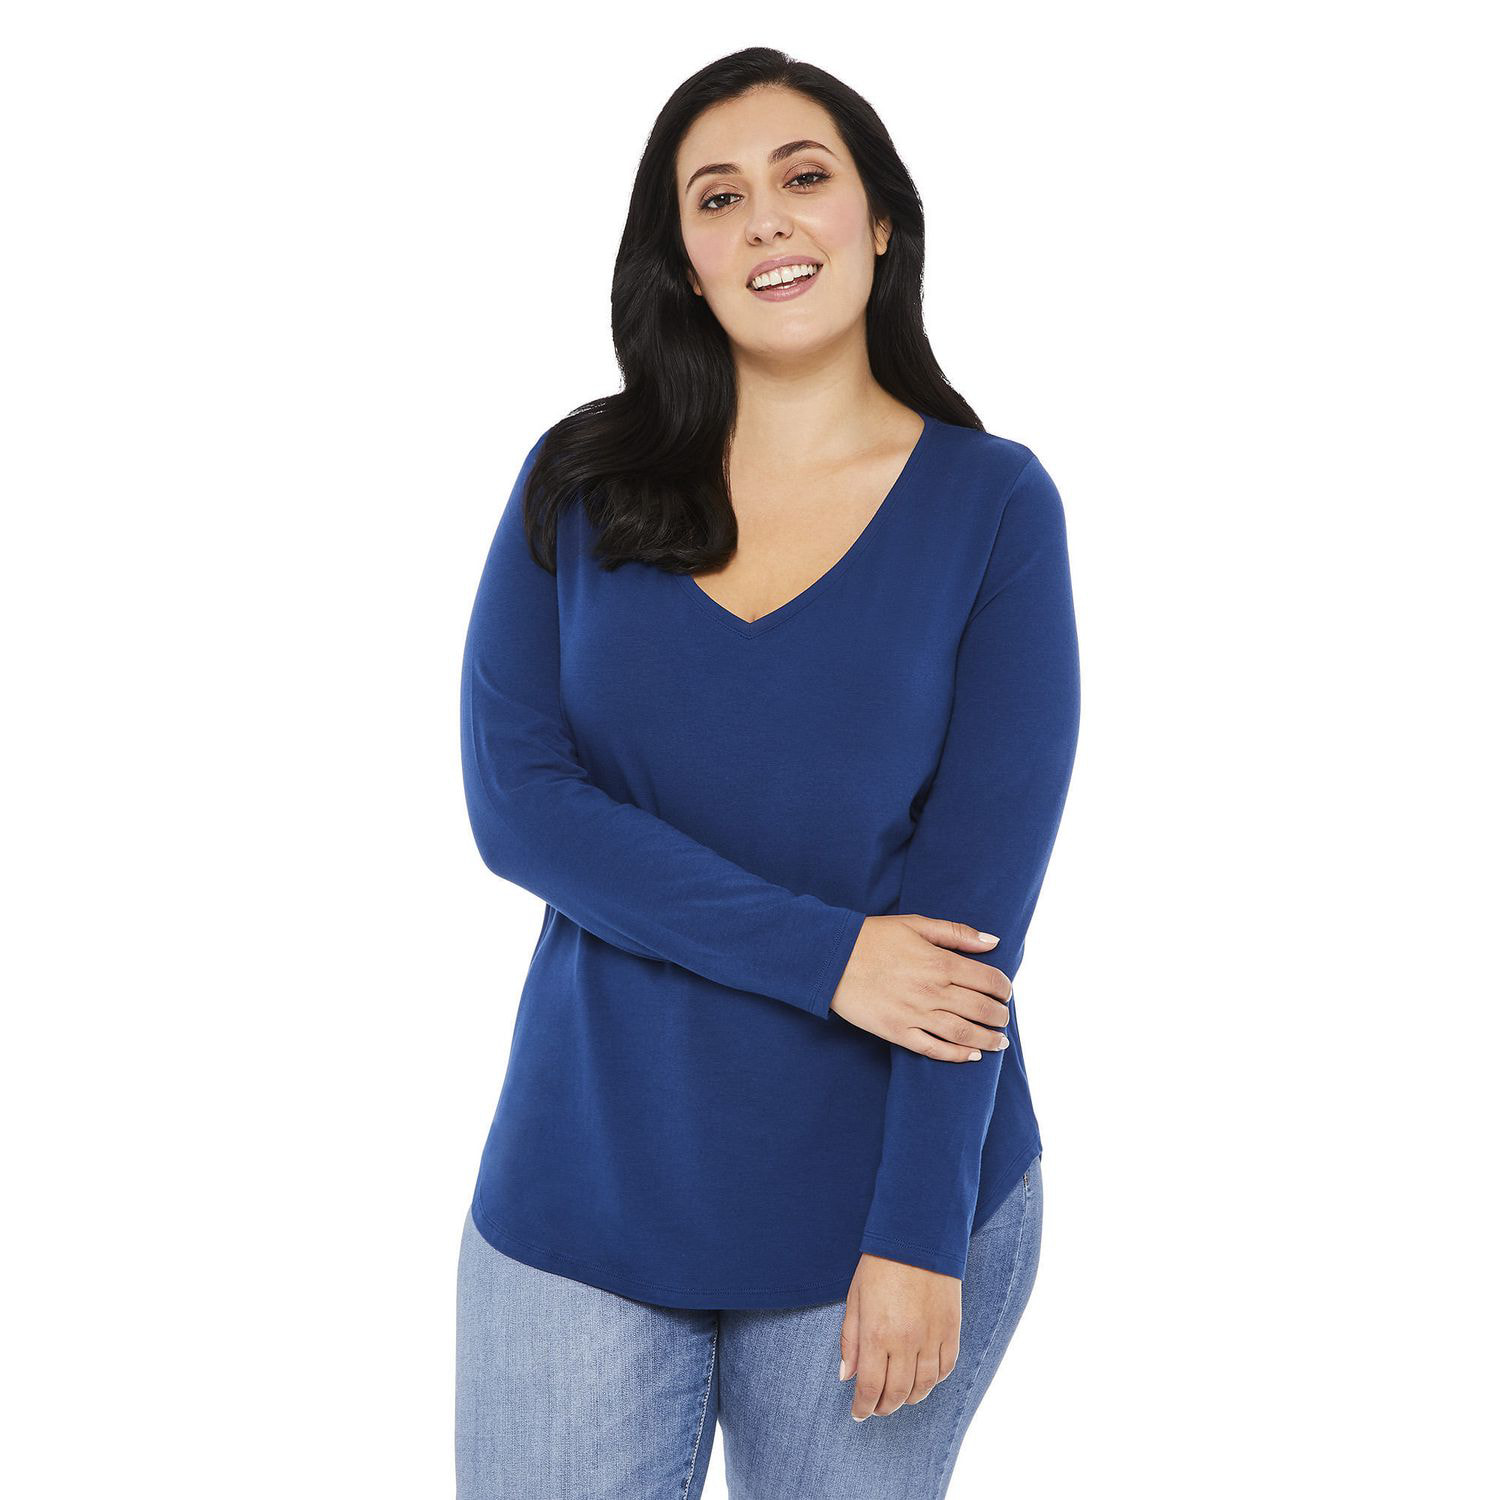 Women's V Neck Tee T,Sale Plus Size,Women Clothes Under 10 Dollars, Clothes,Women  Blouses Clearance Under 10 Dollars,Todays Deals Warehouse Deals,Today's  Deals in Prime at  Women's Clothing store